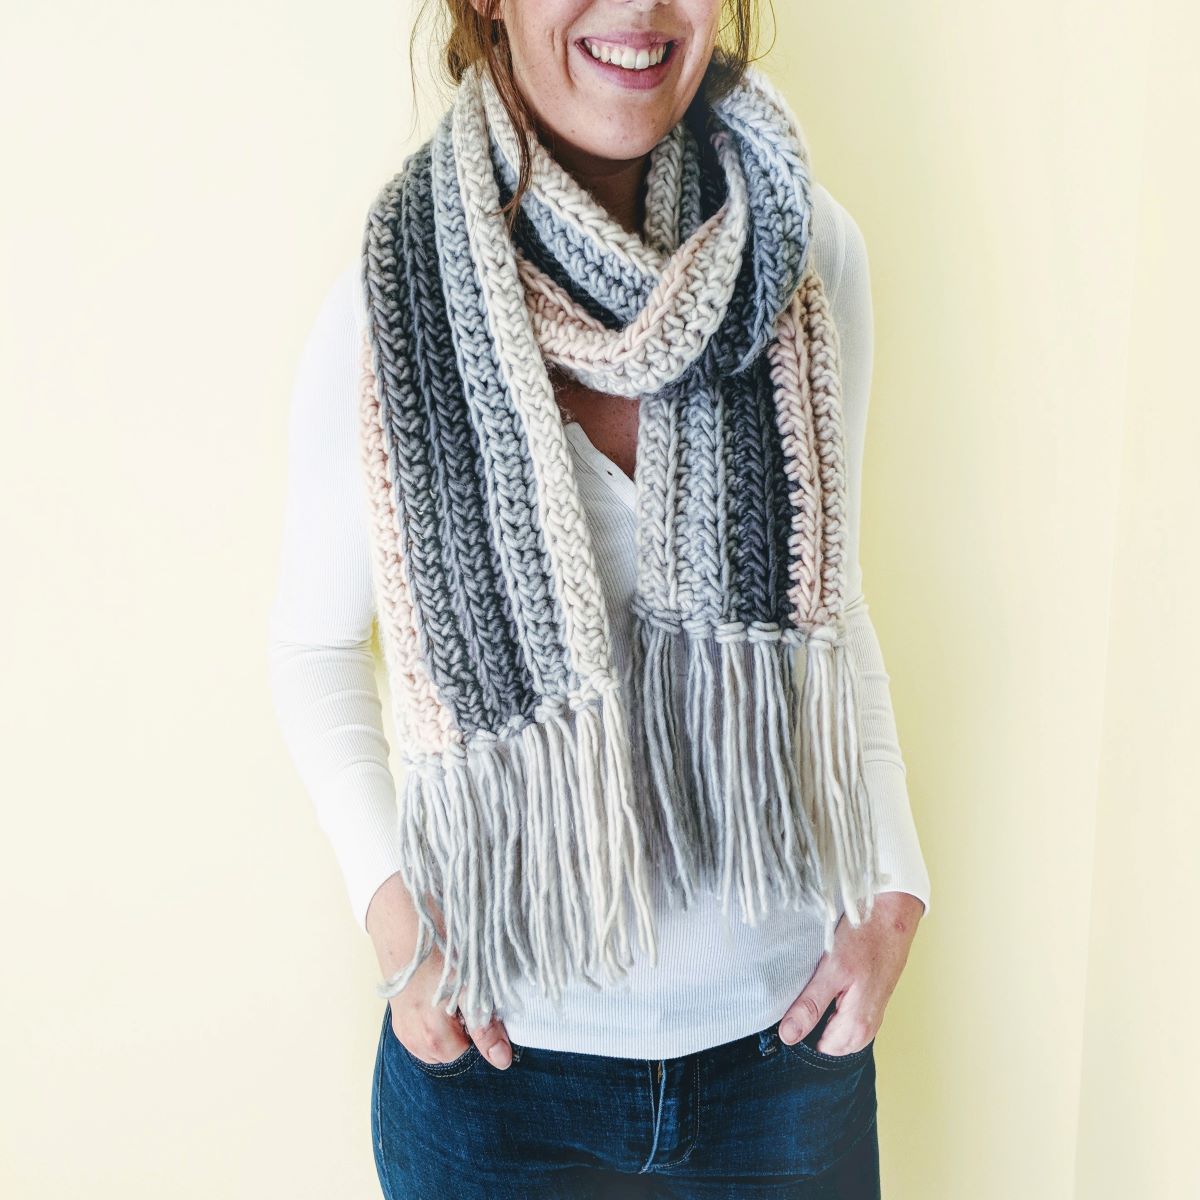 a person wearing a chunky crochet scarf with a white shirt and a pair of jeans